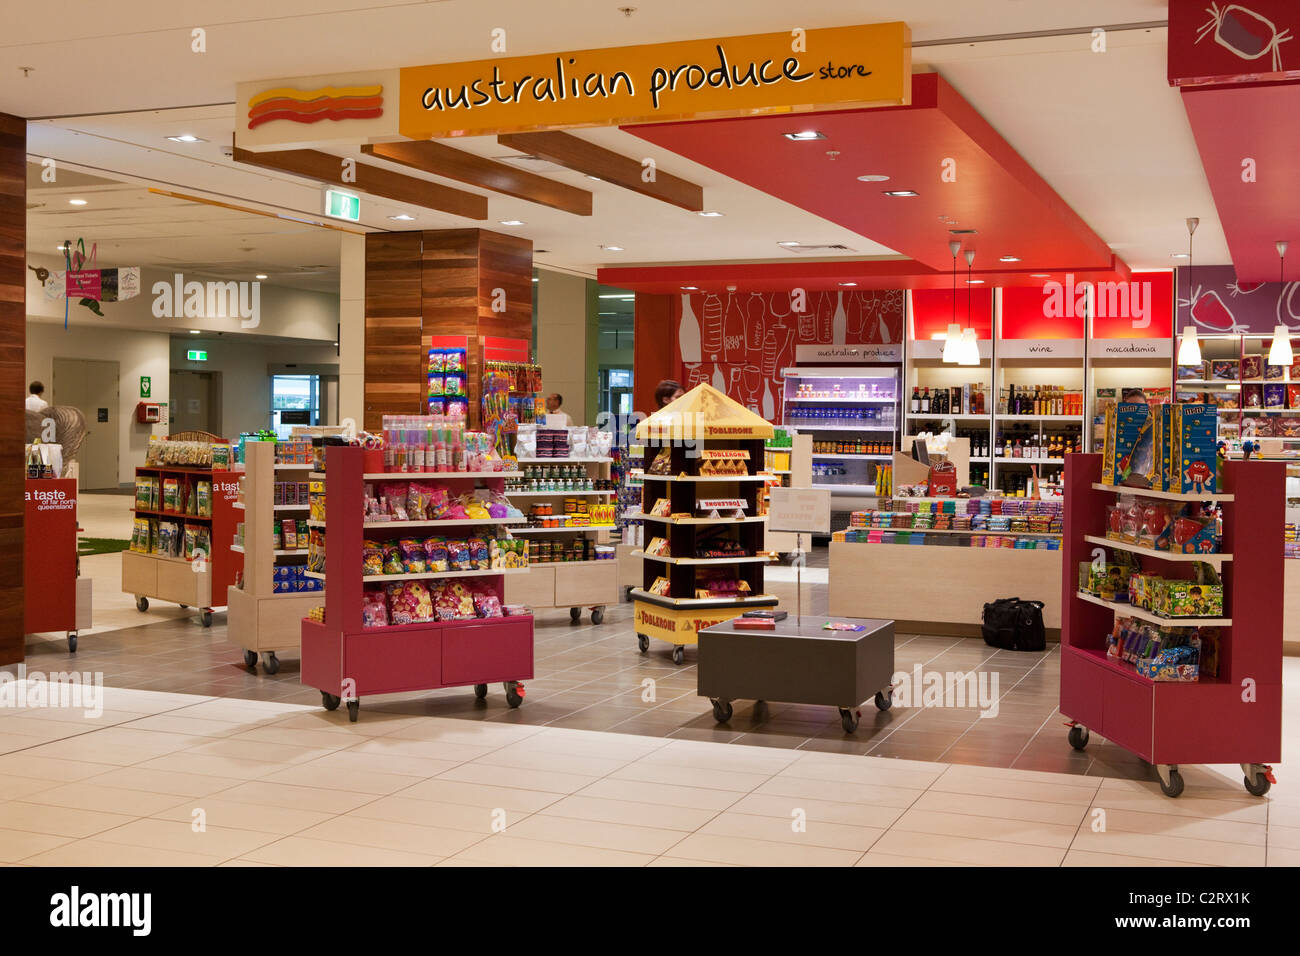 Australian Produce store at Cairns Domestic Airport, Cairns, Queensland, Australia Stock Photo